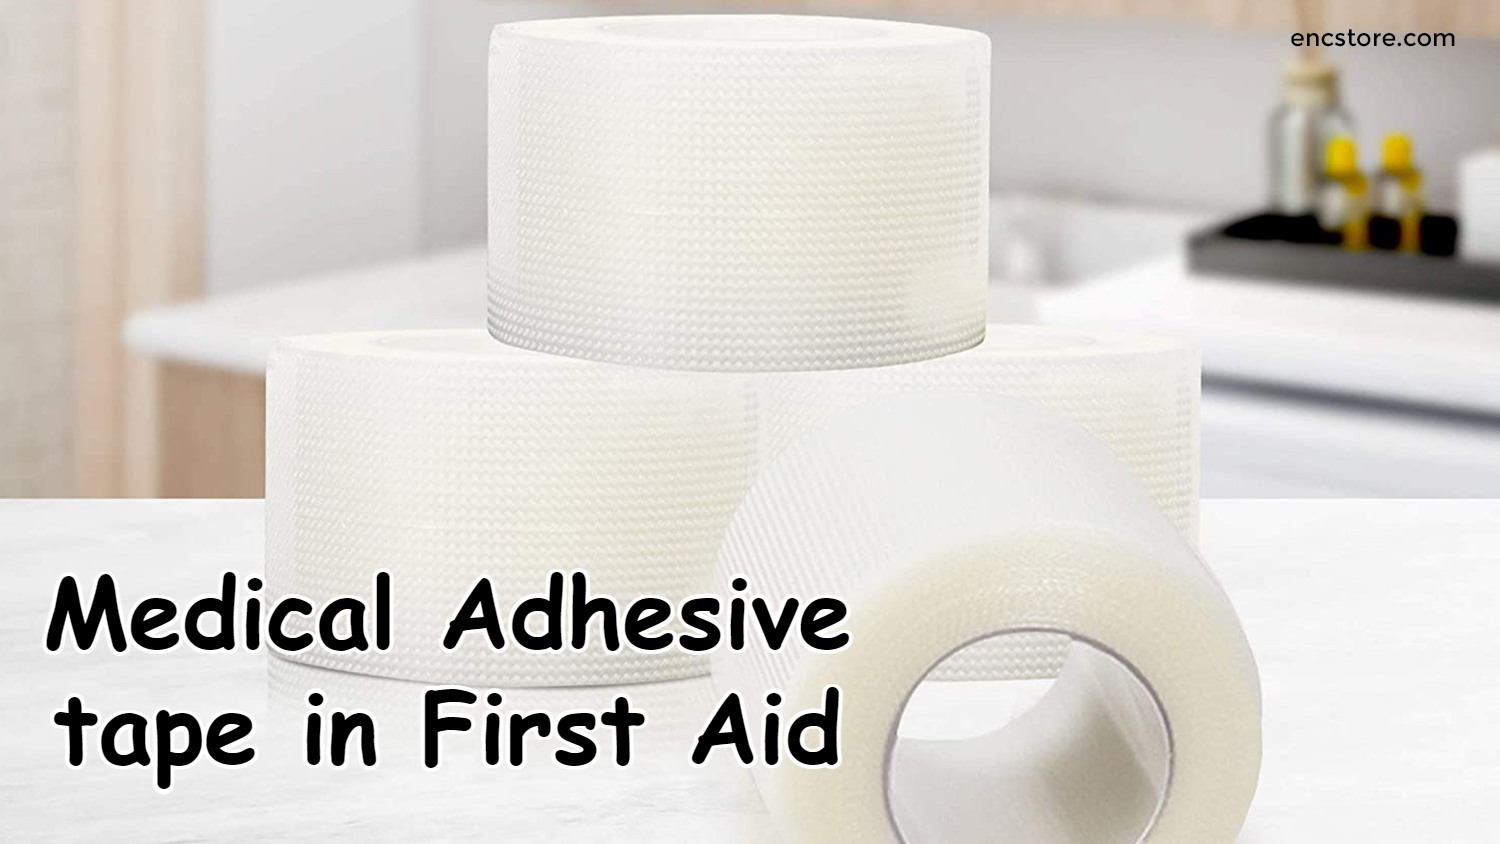 Use of Adhesive Tape in First Aid